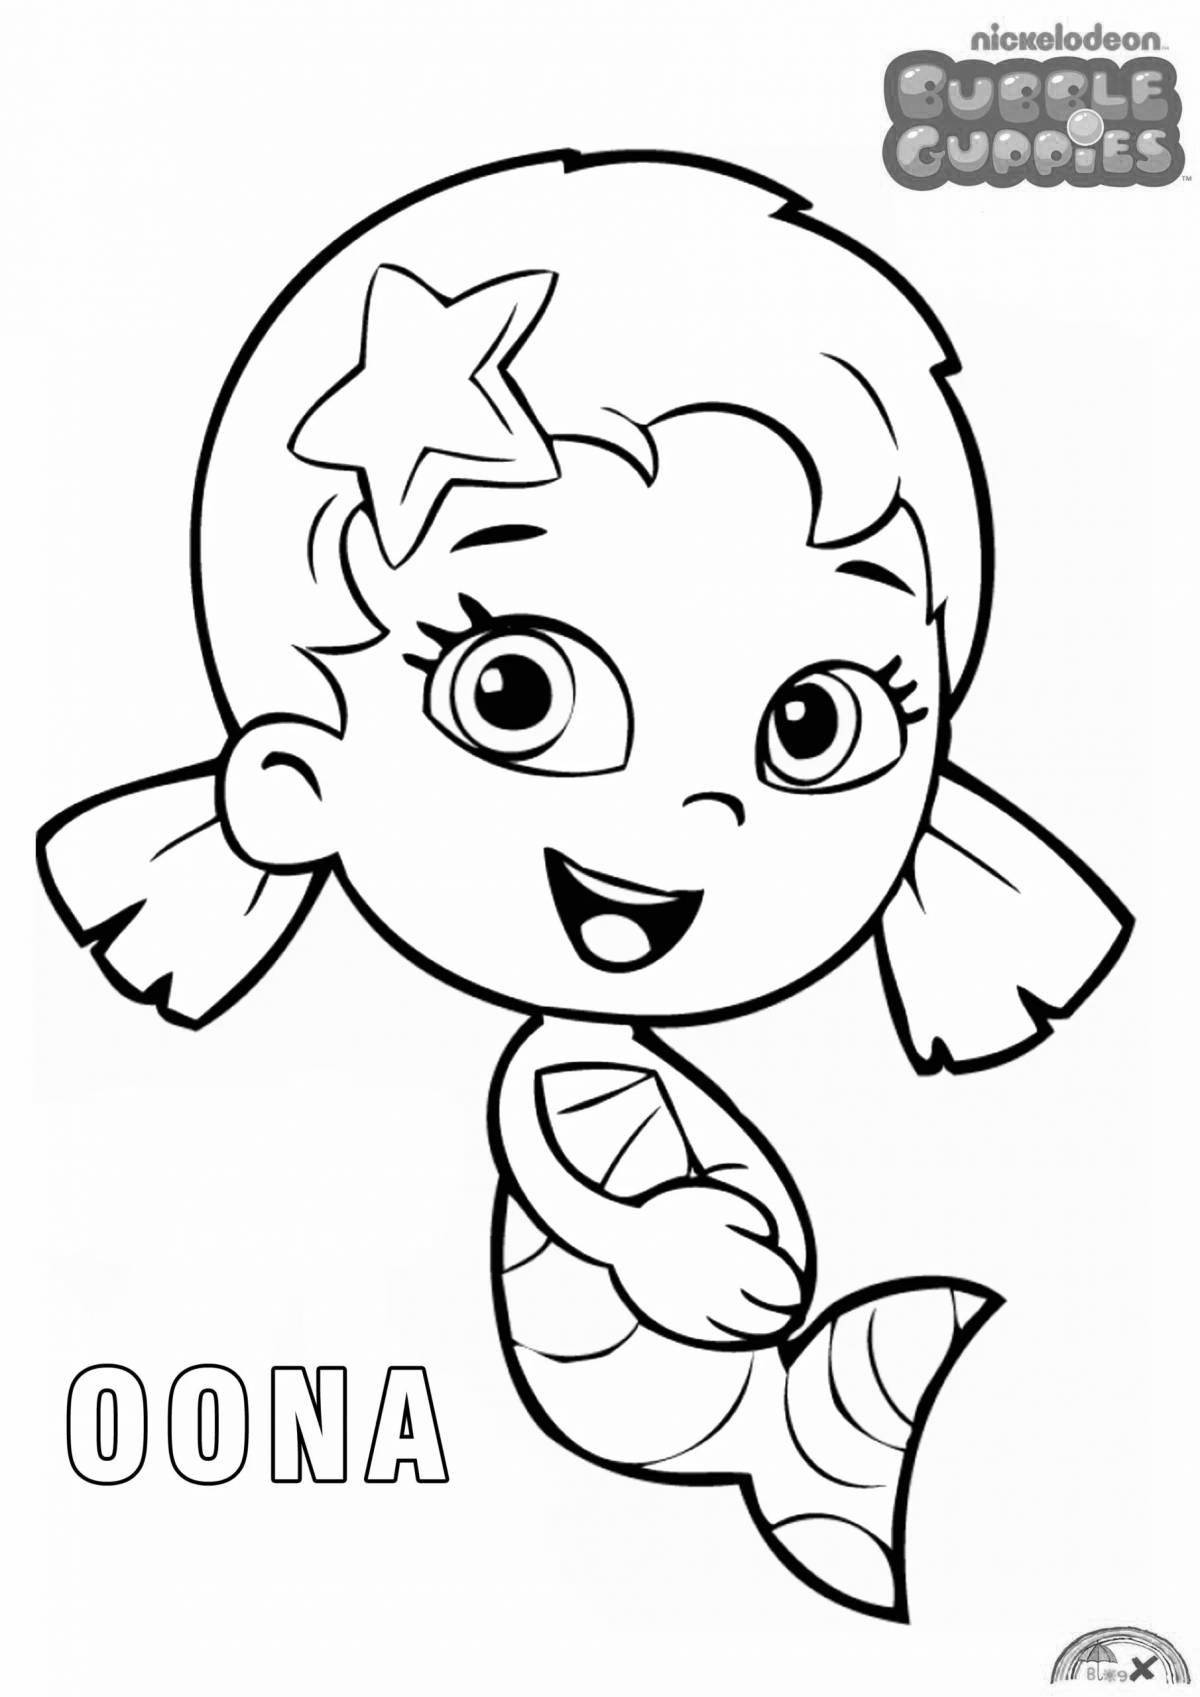 Exciting bubble coloring page